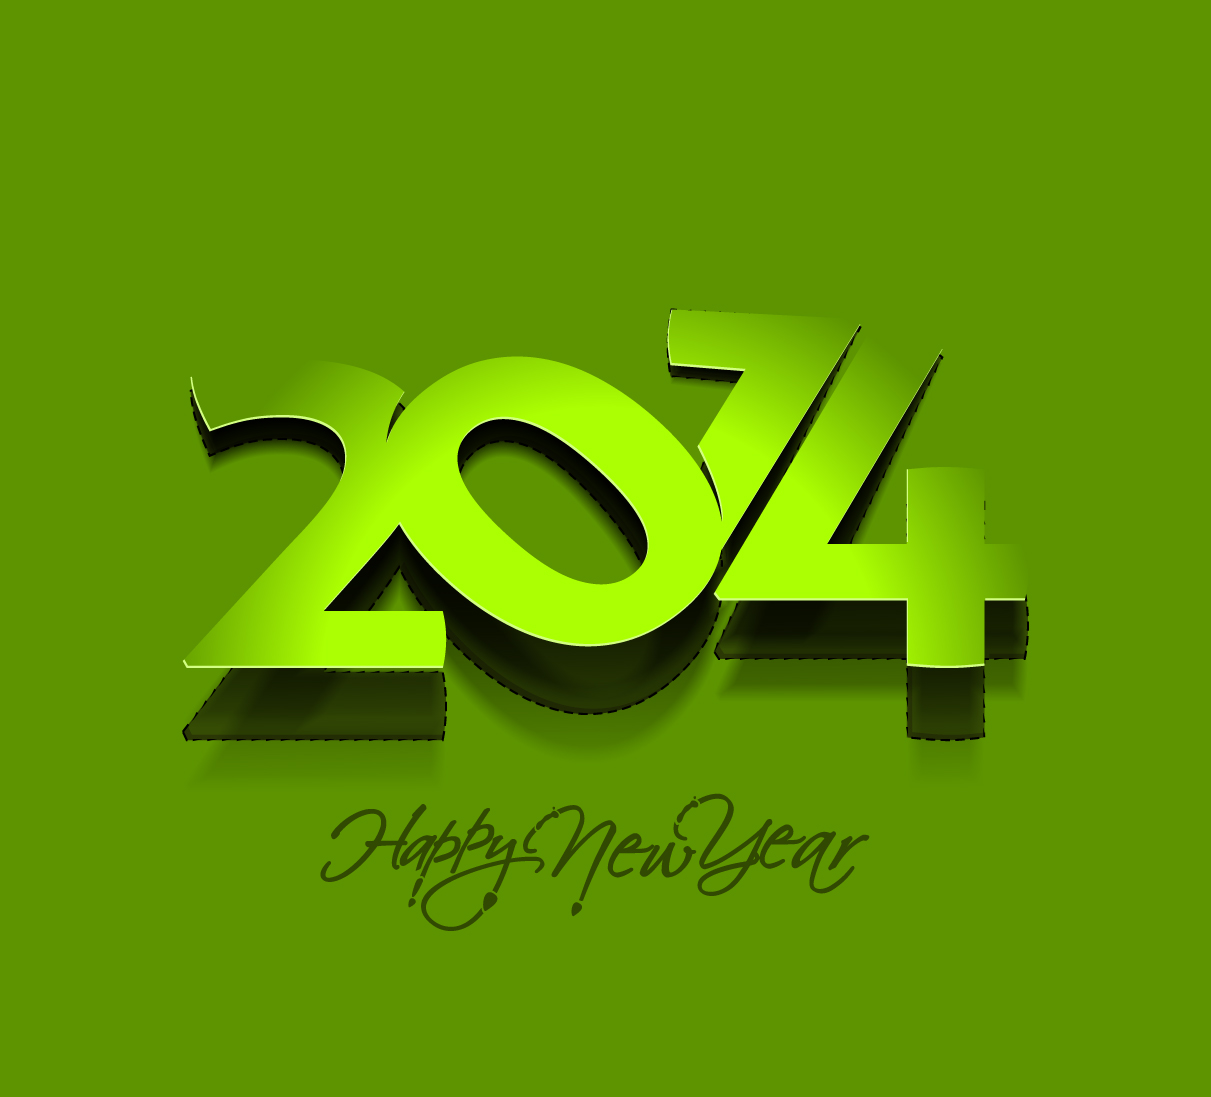 Green Happy New Year 2014 Simple Image HD Wallpaper Picture